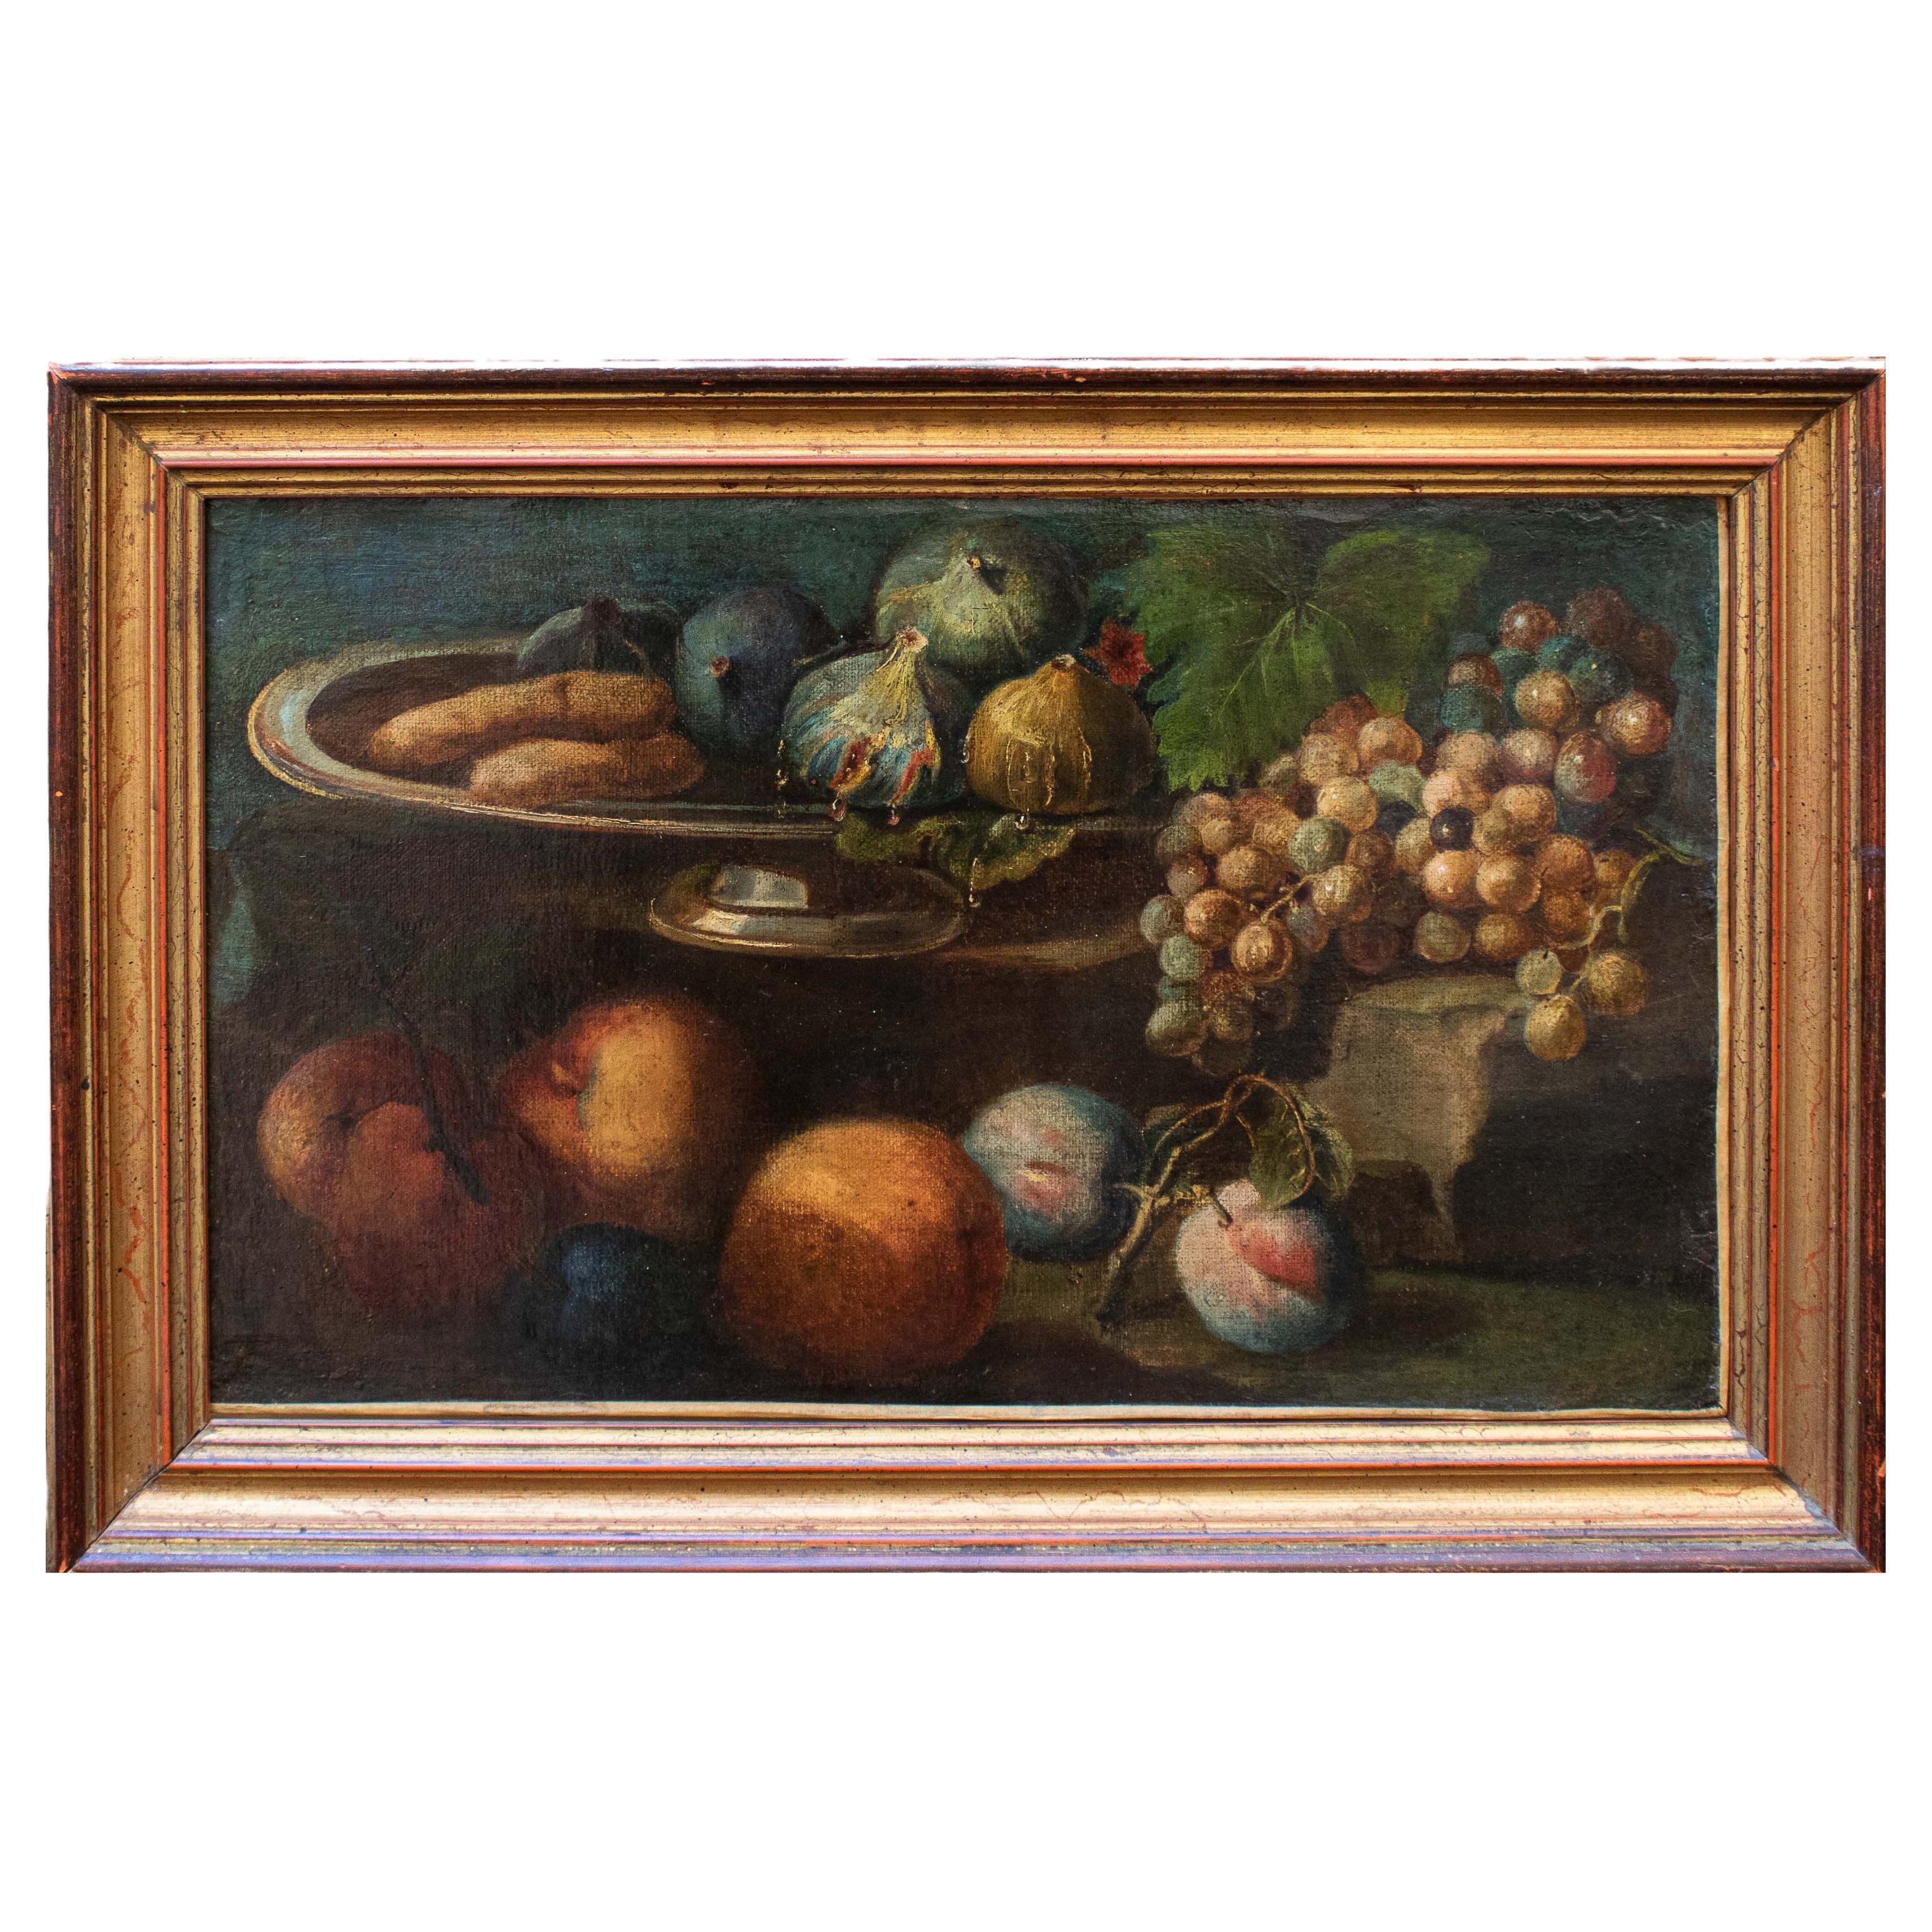 18th Century Still Life with Fruits and Bisquits Painting Oil on Canvas